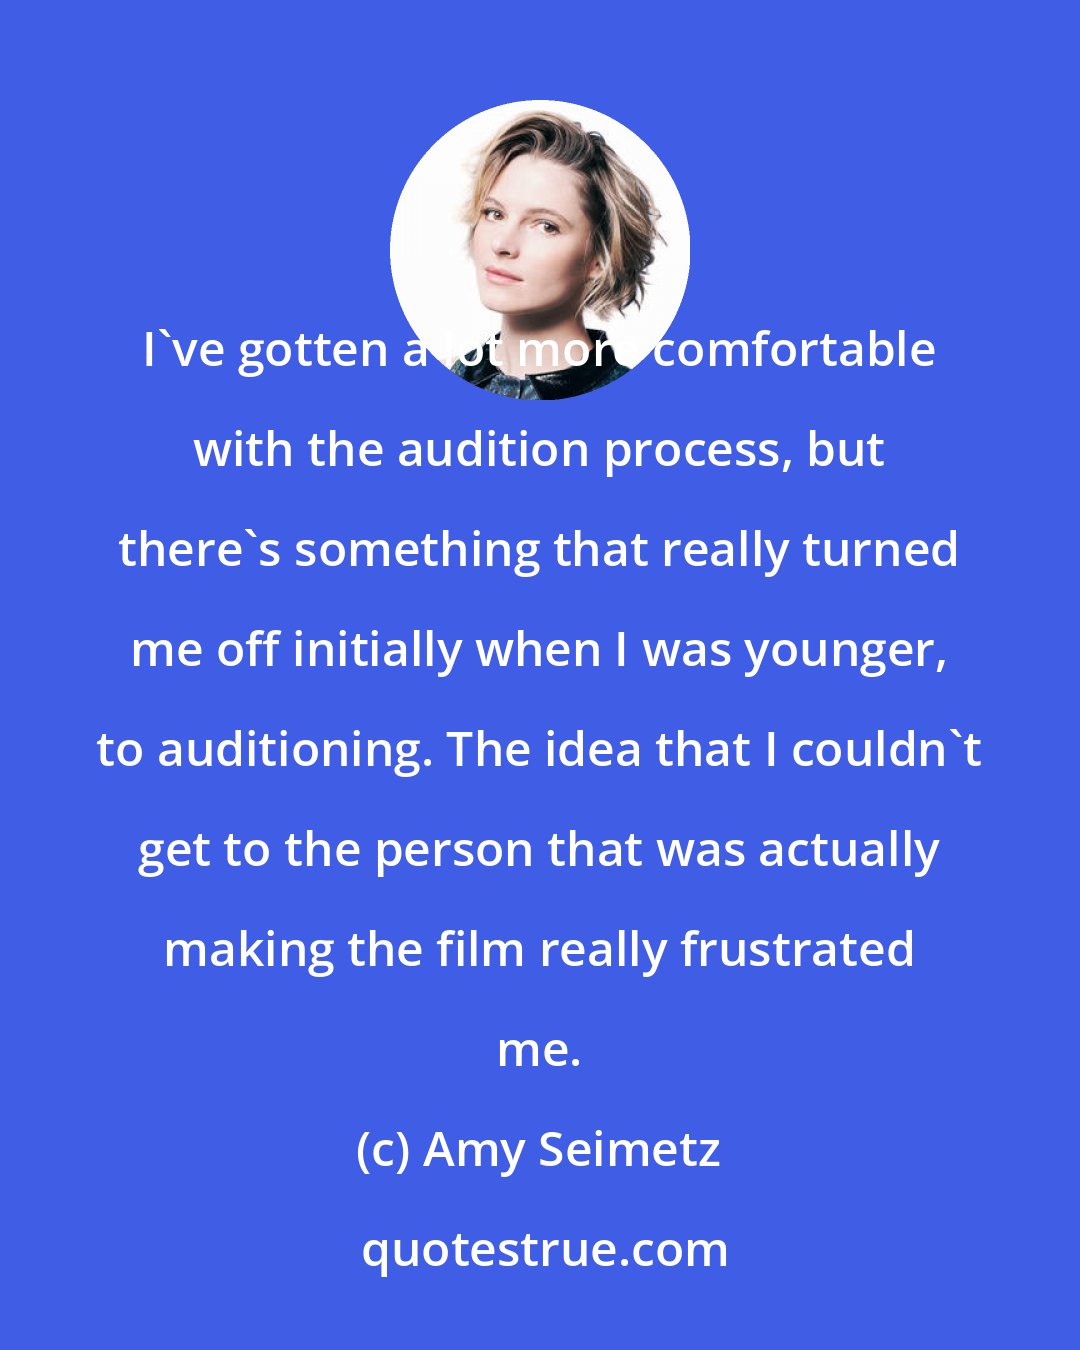 Amy Seimetz: I've gotten a lot more comfortable with the audition process, but there's something that really turned me off initially when I was younger, to auditioning. The idea that I couldn't get to the person that was actually making the film really frustrated me.